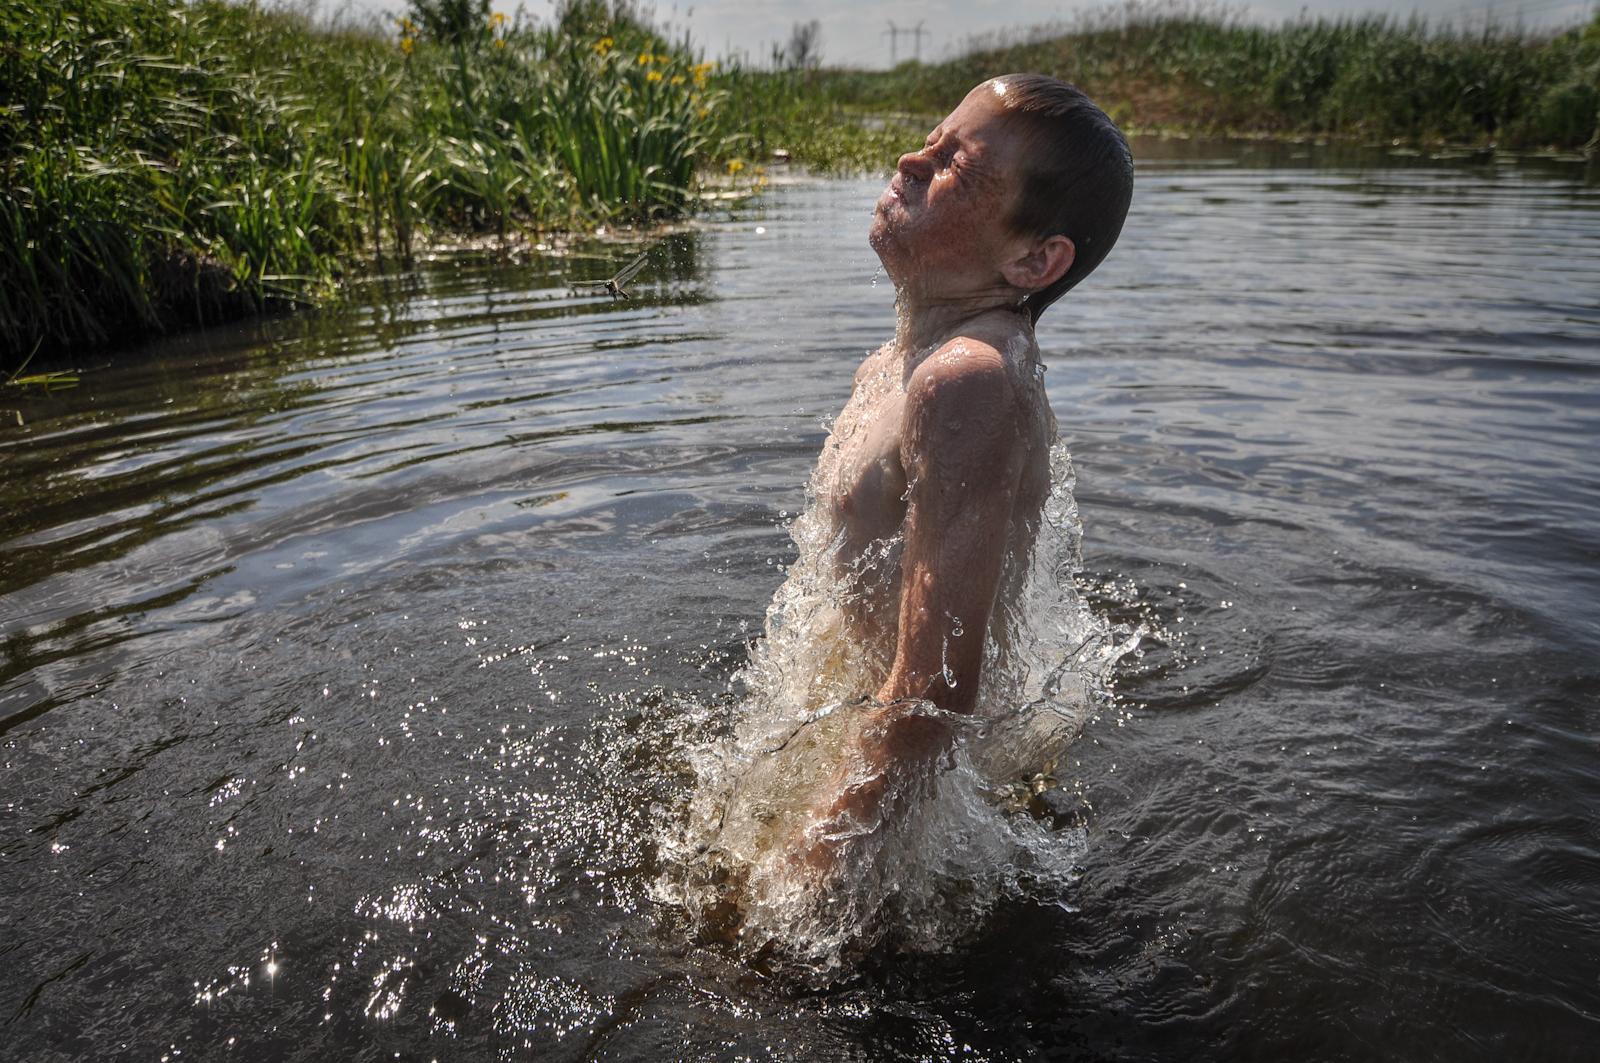 A boy swims in a river that runs through the Chernobyl nuclear Exclusion Zone in Ukraine